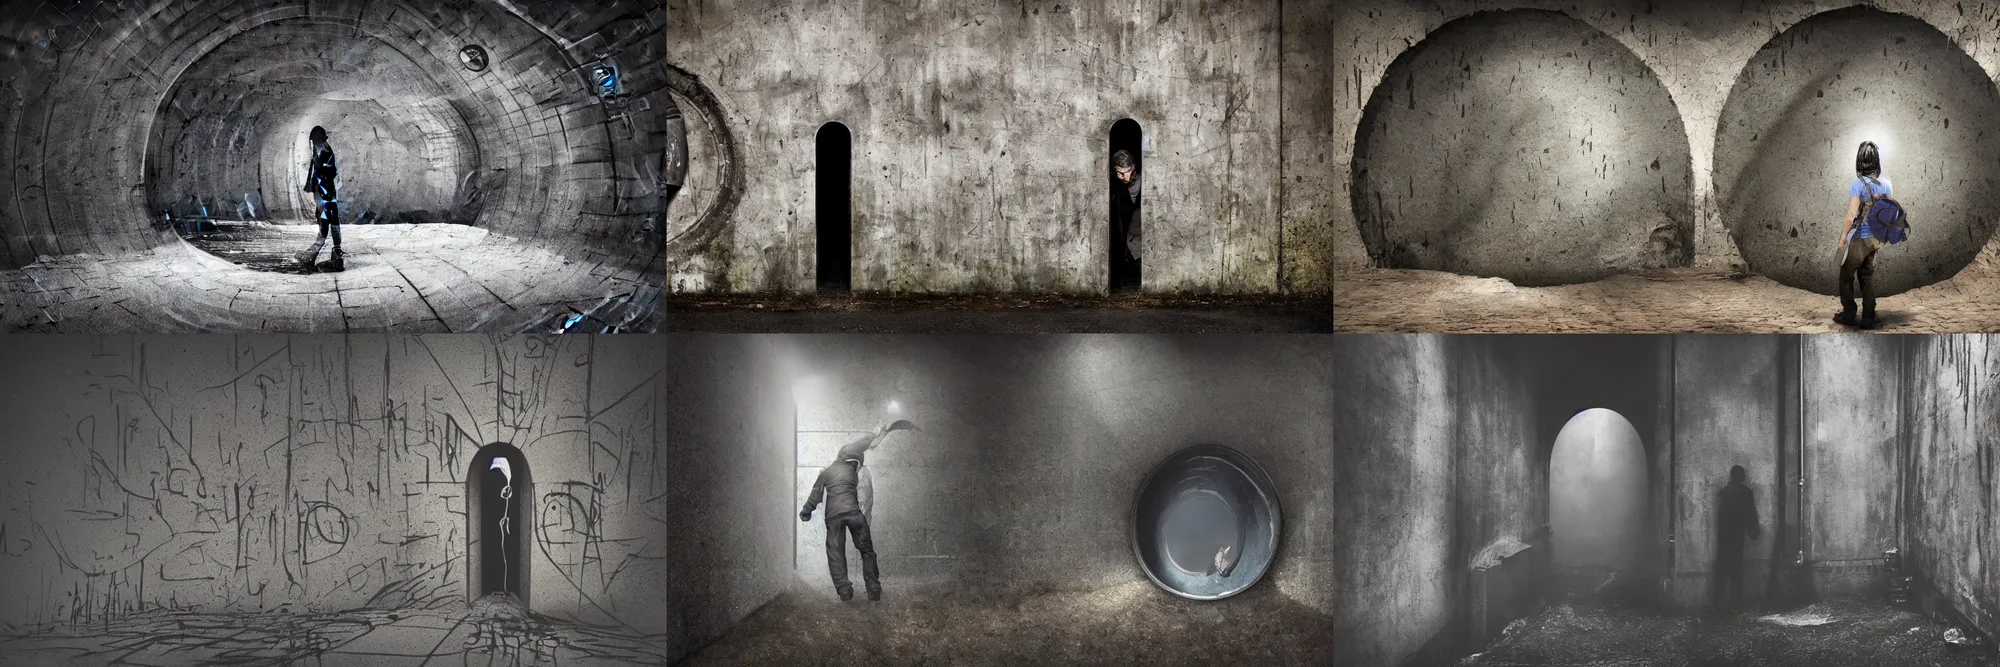 Prompt: dark entrance of large round slimy wet dark sewer pipe in wall in dark wet deep underground london sewer, water dripping down walls, person standing at pipe entrance, wet, water flowing, graffiti on walls, damp, sludgy, yukky, dramatic, misty, concept art,